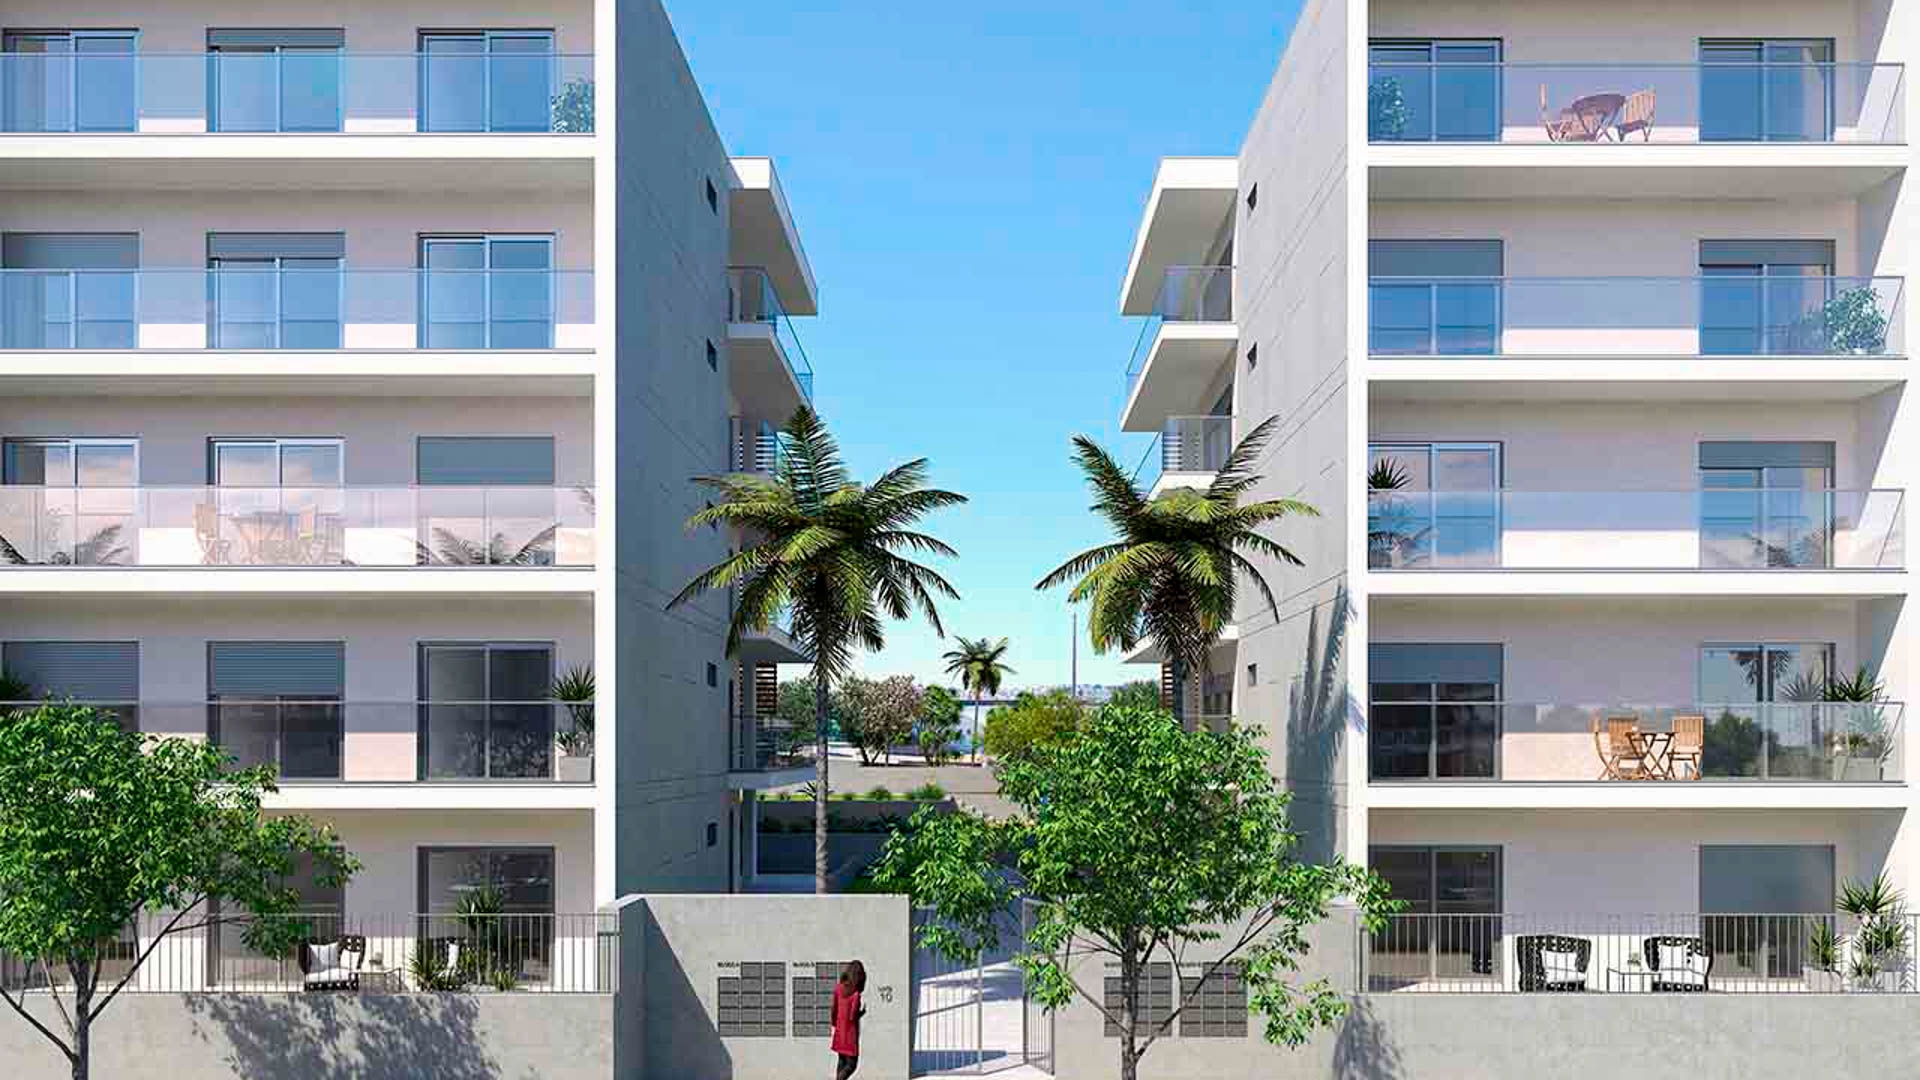 Off Plan – Brand New 3 Bedroom Apartments, Albufeira | VM1970 Eco-friendly features to minimize environmental impact, these new apartments are perfect for an investment opportunity or holiday home